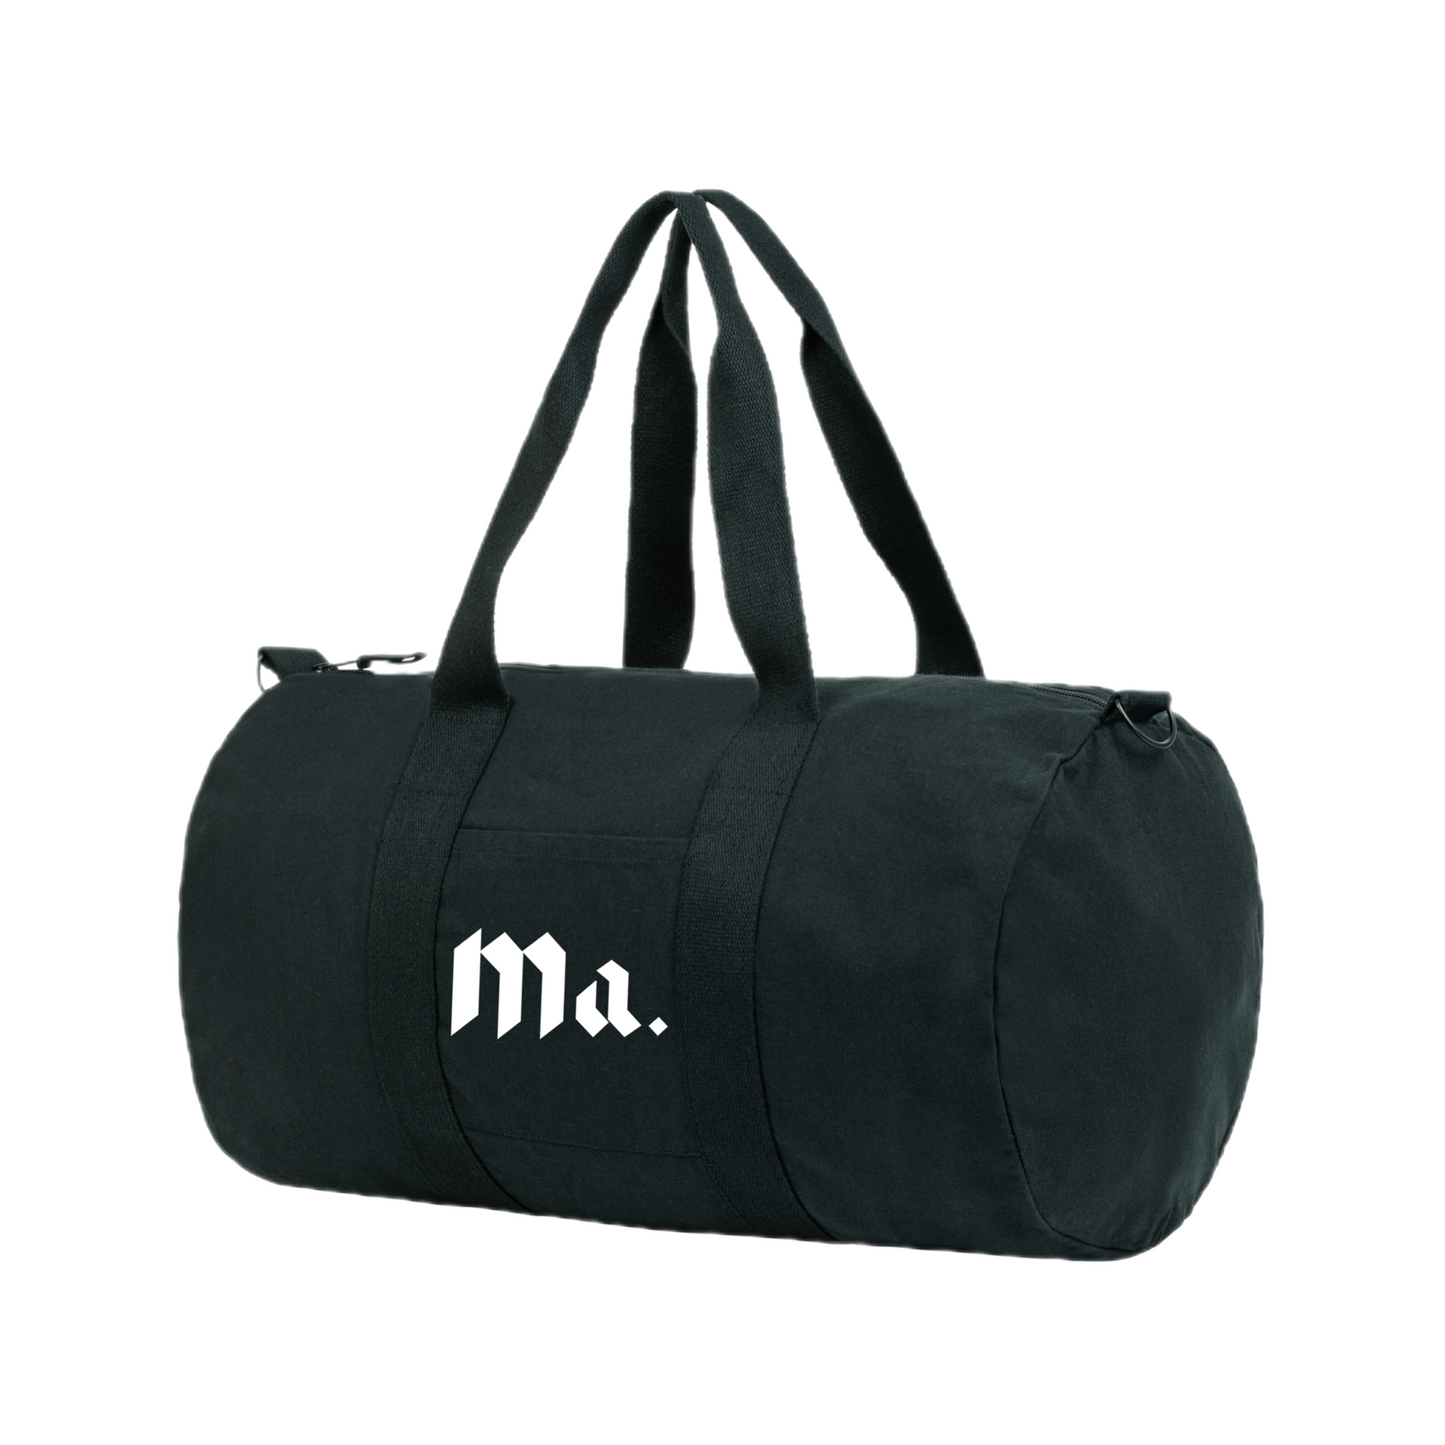 Black More amoure Duffle bag made out of organic cotton with the Ma. logo printed at the front